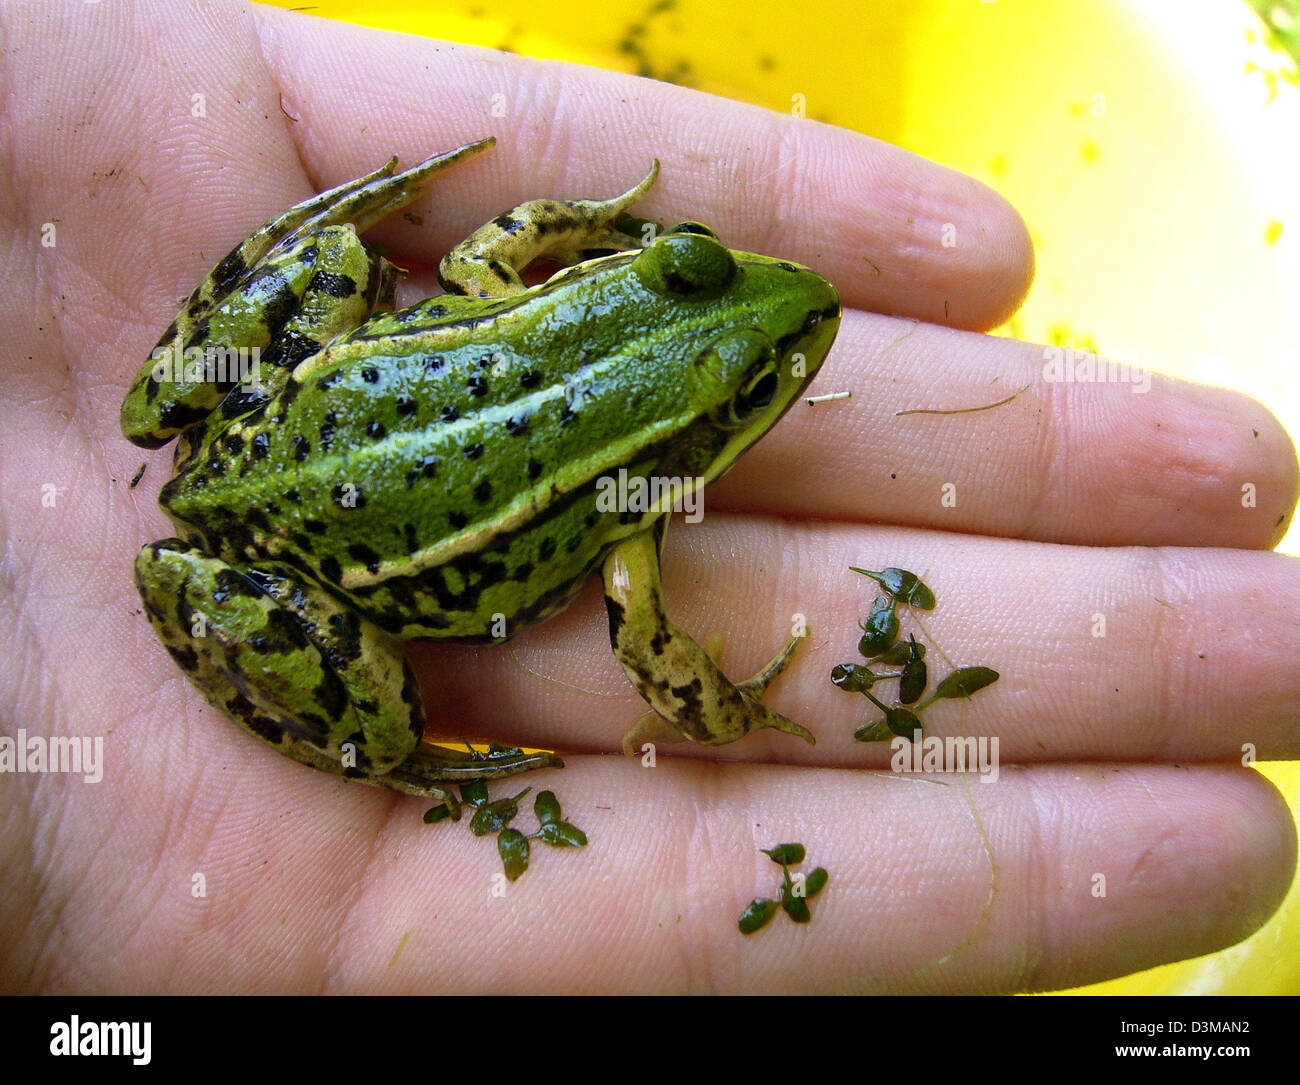 A Common Frog (Rana temporaria) catched in a pond sits on the hand of a child, Langeland, Denmark, 28 July 2005. Photo: Ingo Wagner Stock Photo